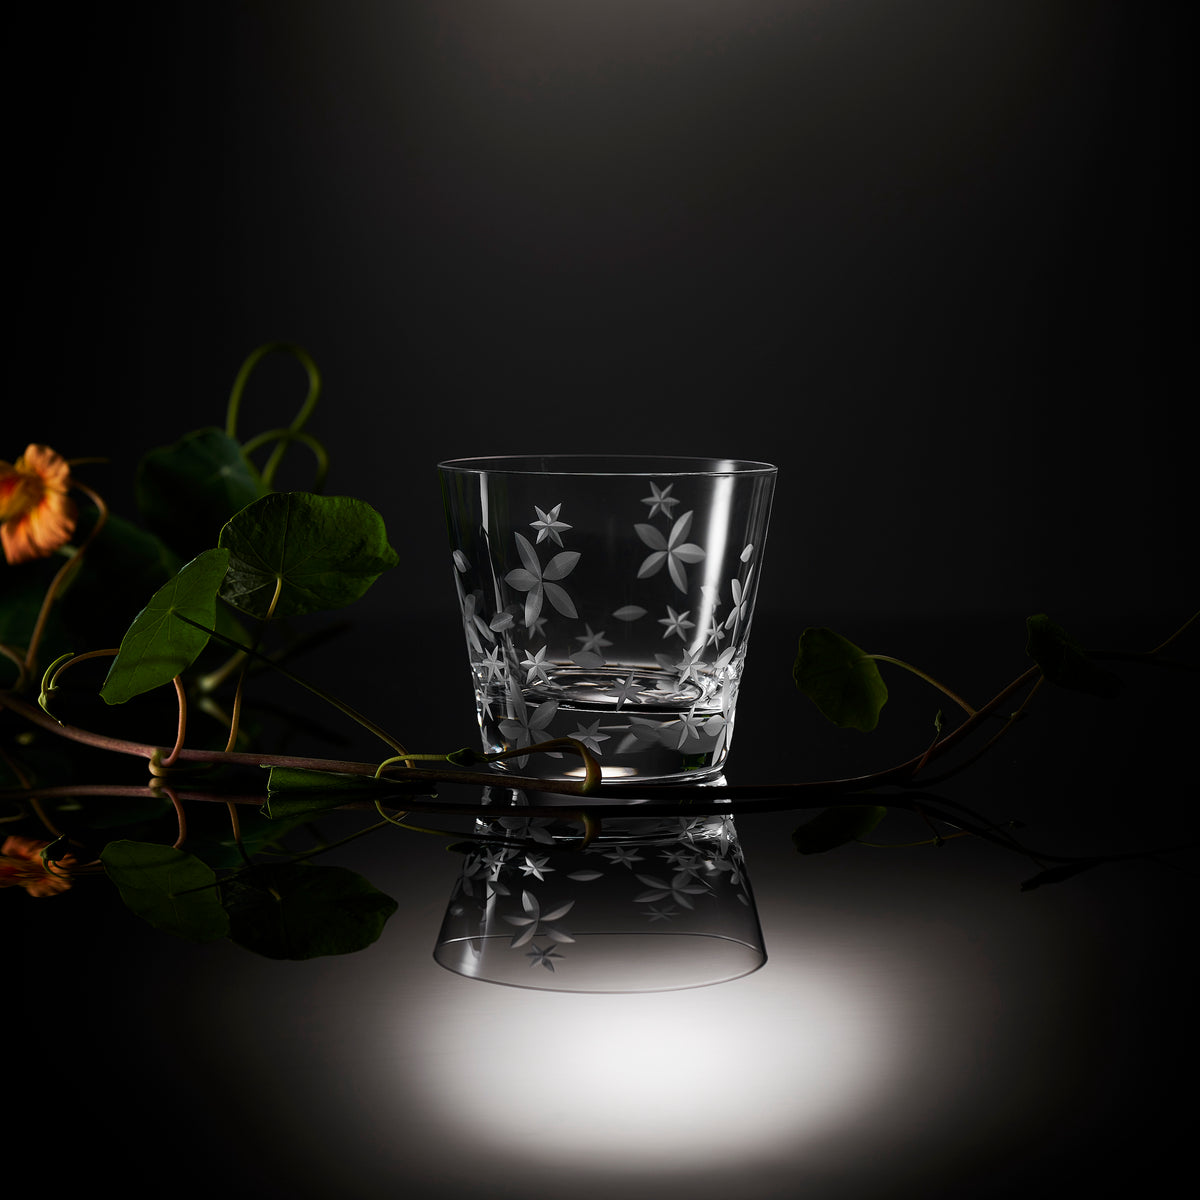 Chatham Bloom Tumbler by Caskata; a lead-free crystal rocks glass etched with a floral design.